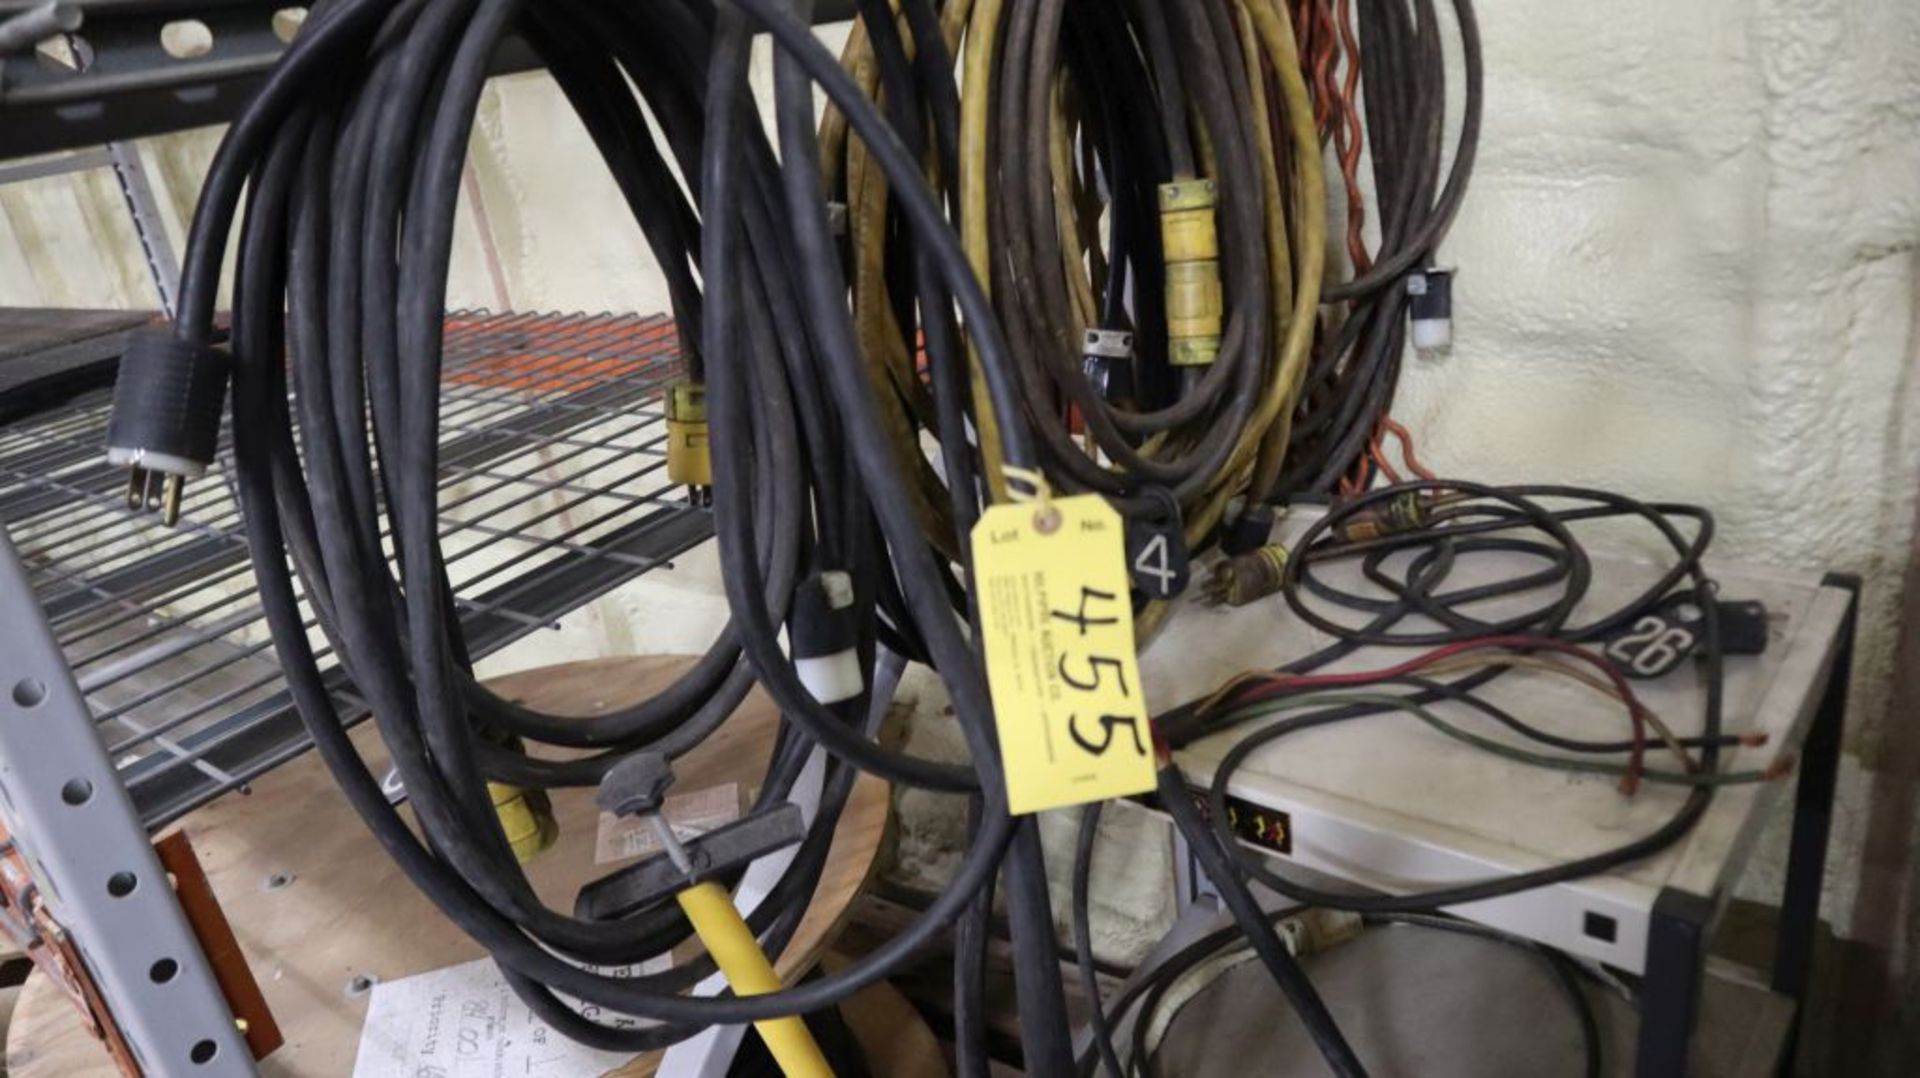 Lg. Lot drop cords,( located in wire room).